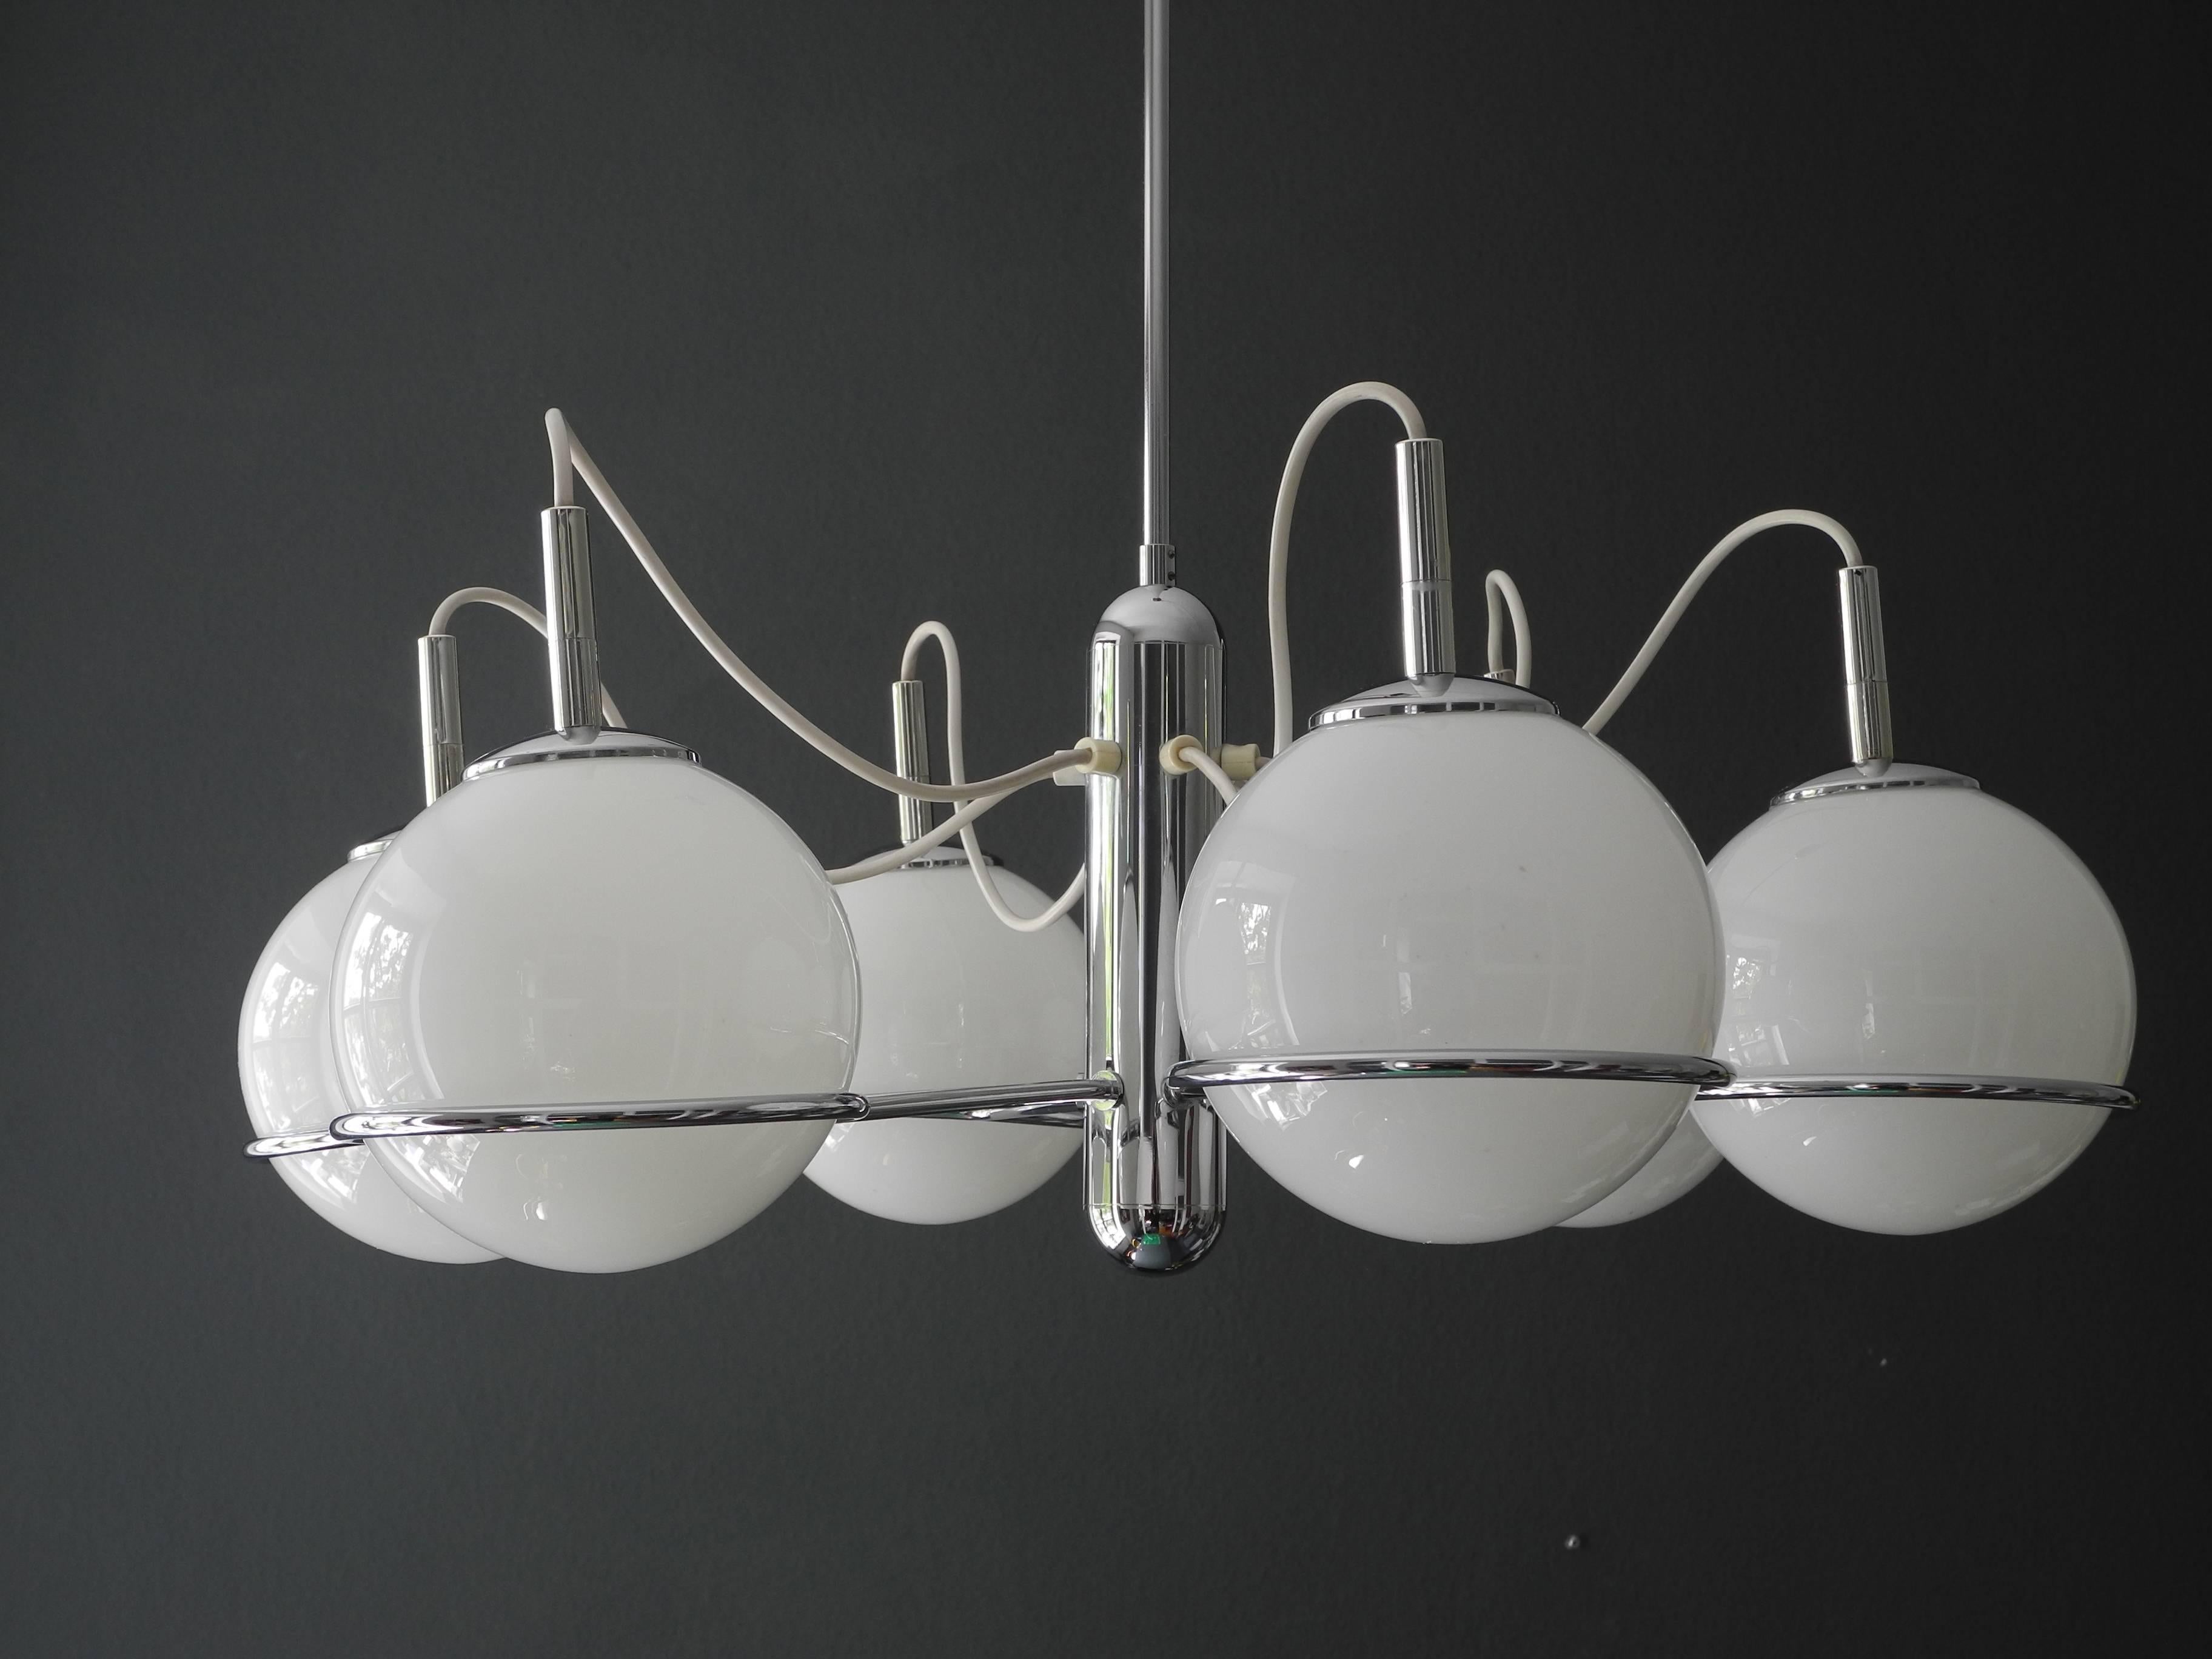 Italian 1960s Pop Art Space Age chrome ceiling lamp with six glass spheres.
The glass balls are simply placed on the rack. Great pop art design in impeccable condition.
Glare free pleasant light with six E14 sockets.
Very good vintage condition